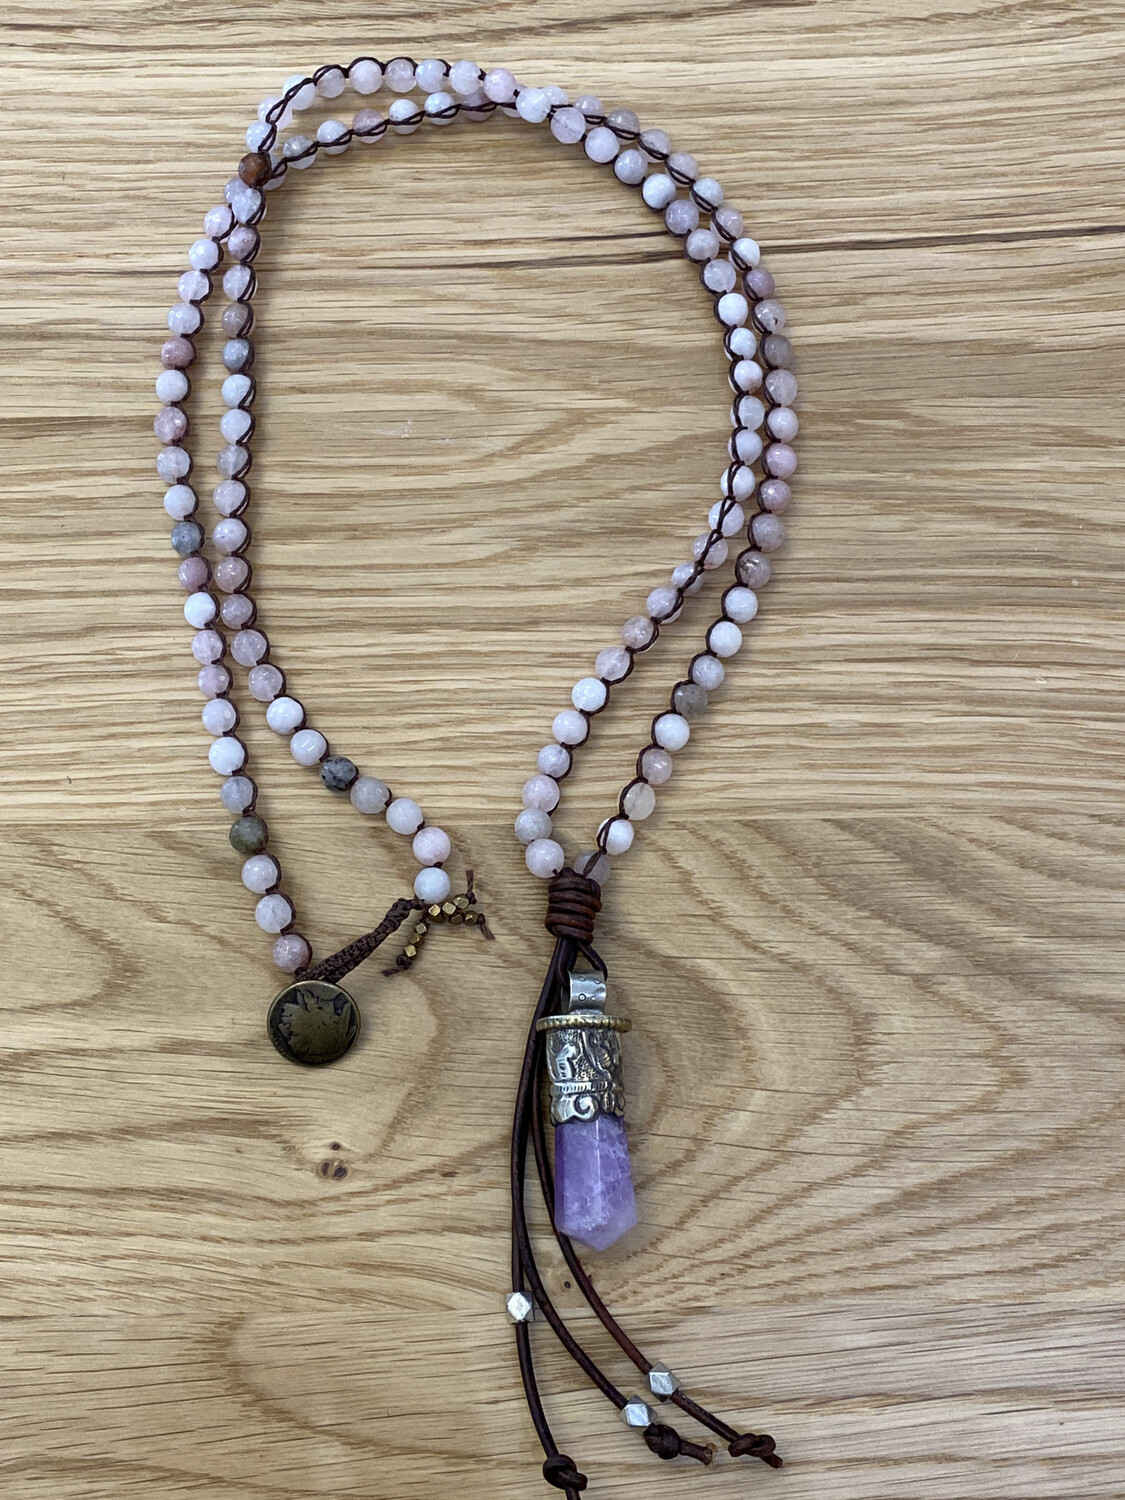 Gemstone Necklace With Amethyst Repousse Pendant